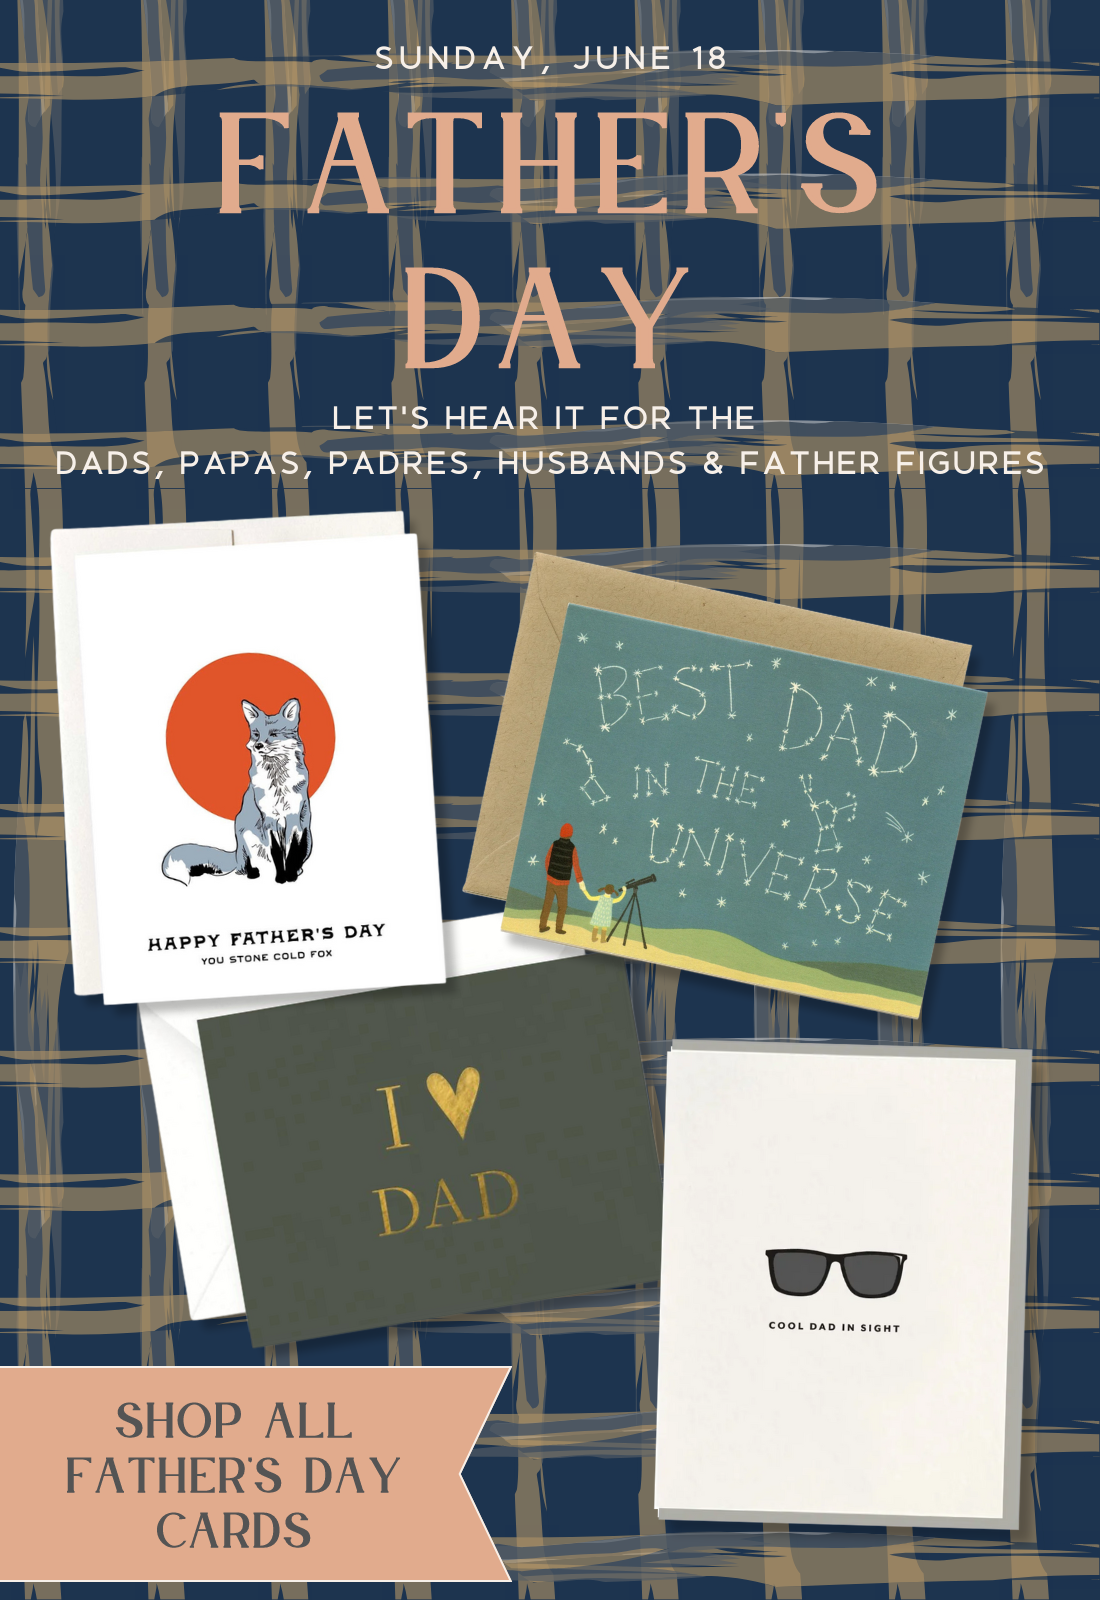 urbanic paper boutique lost angeles gifts cards stationery wrap fathers day dad pop papa daddy cool dad love